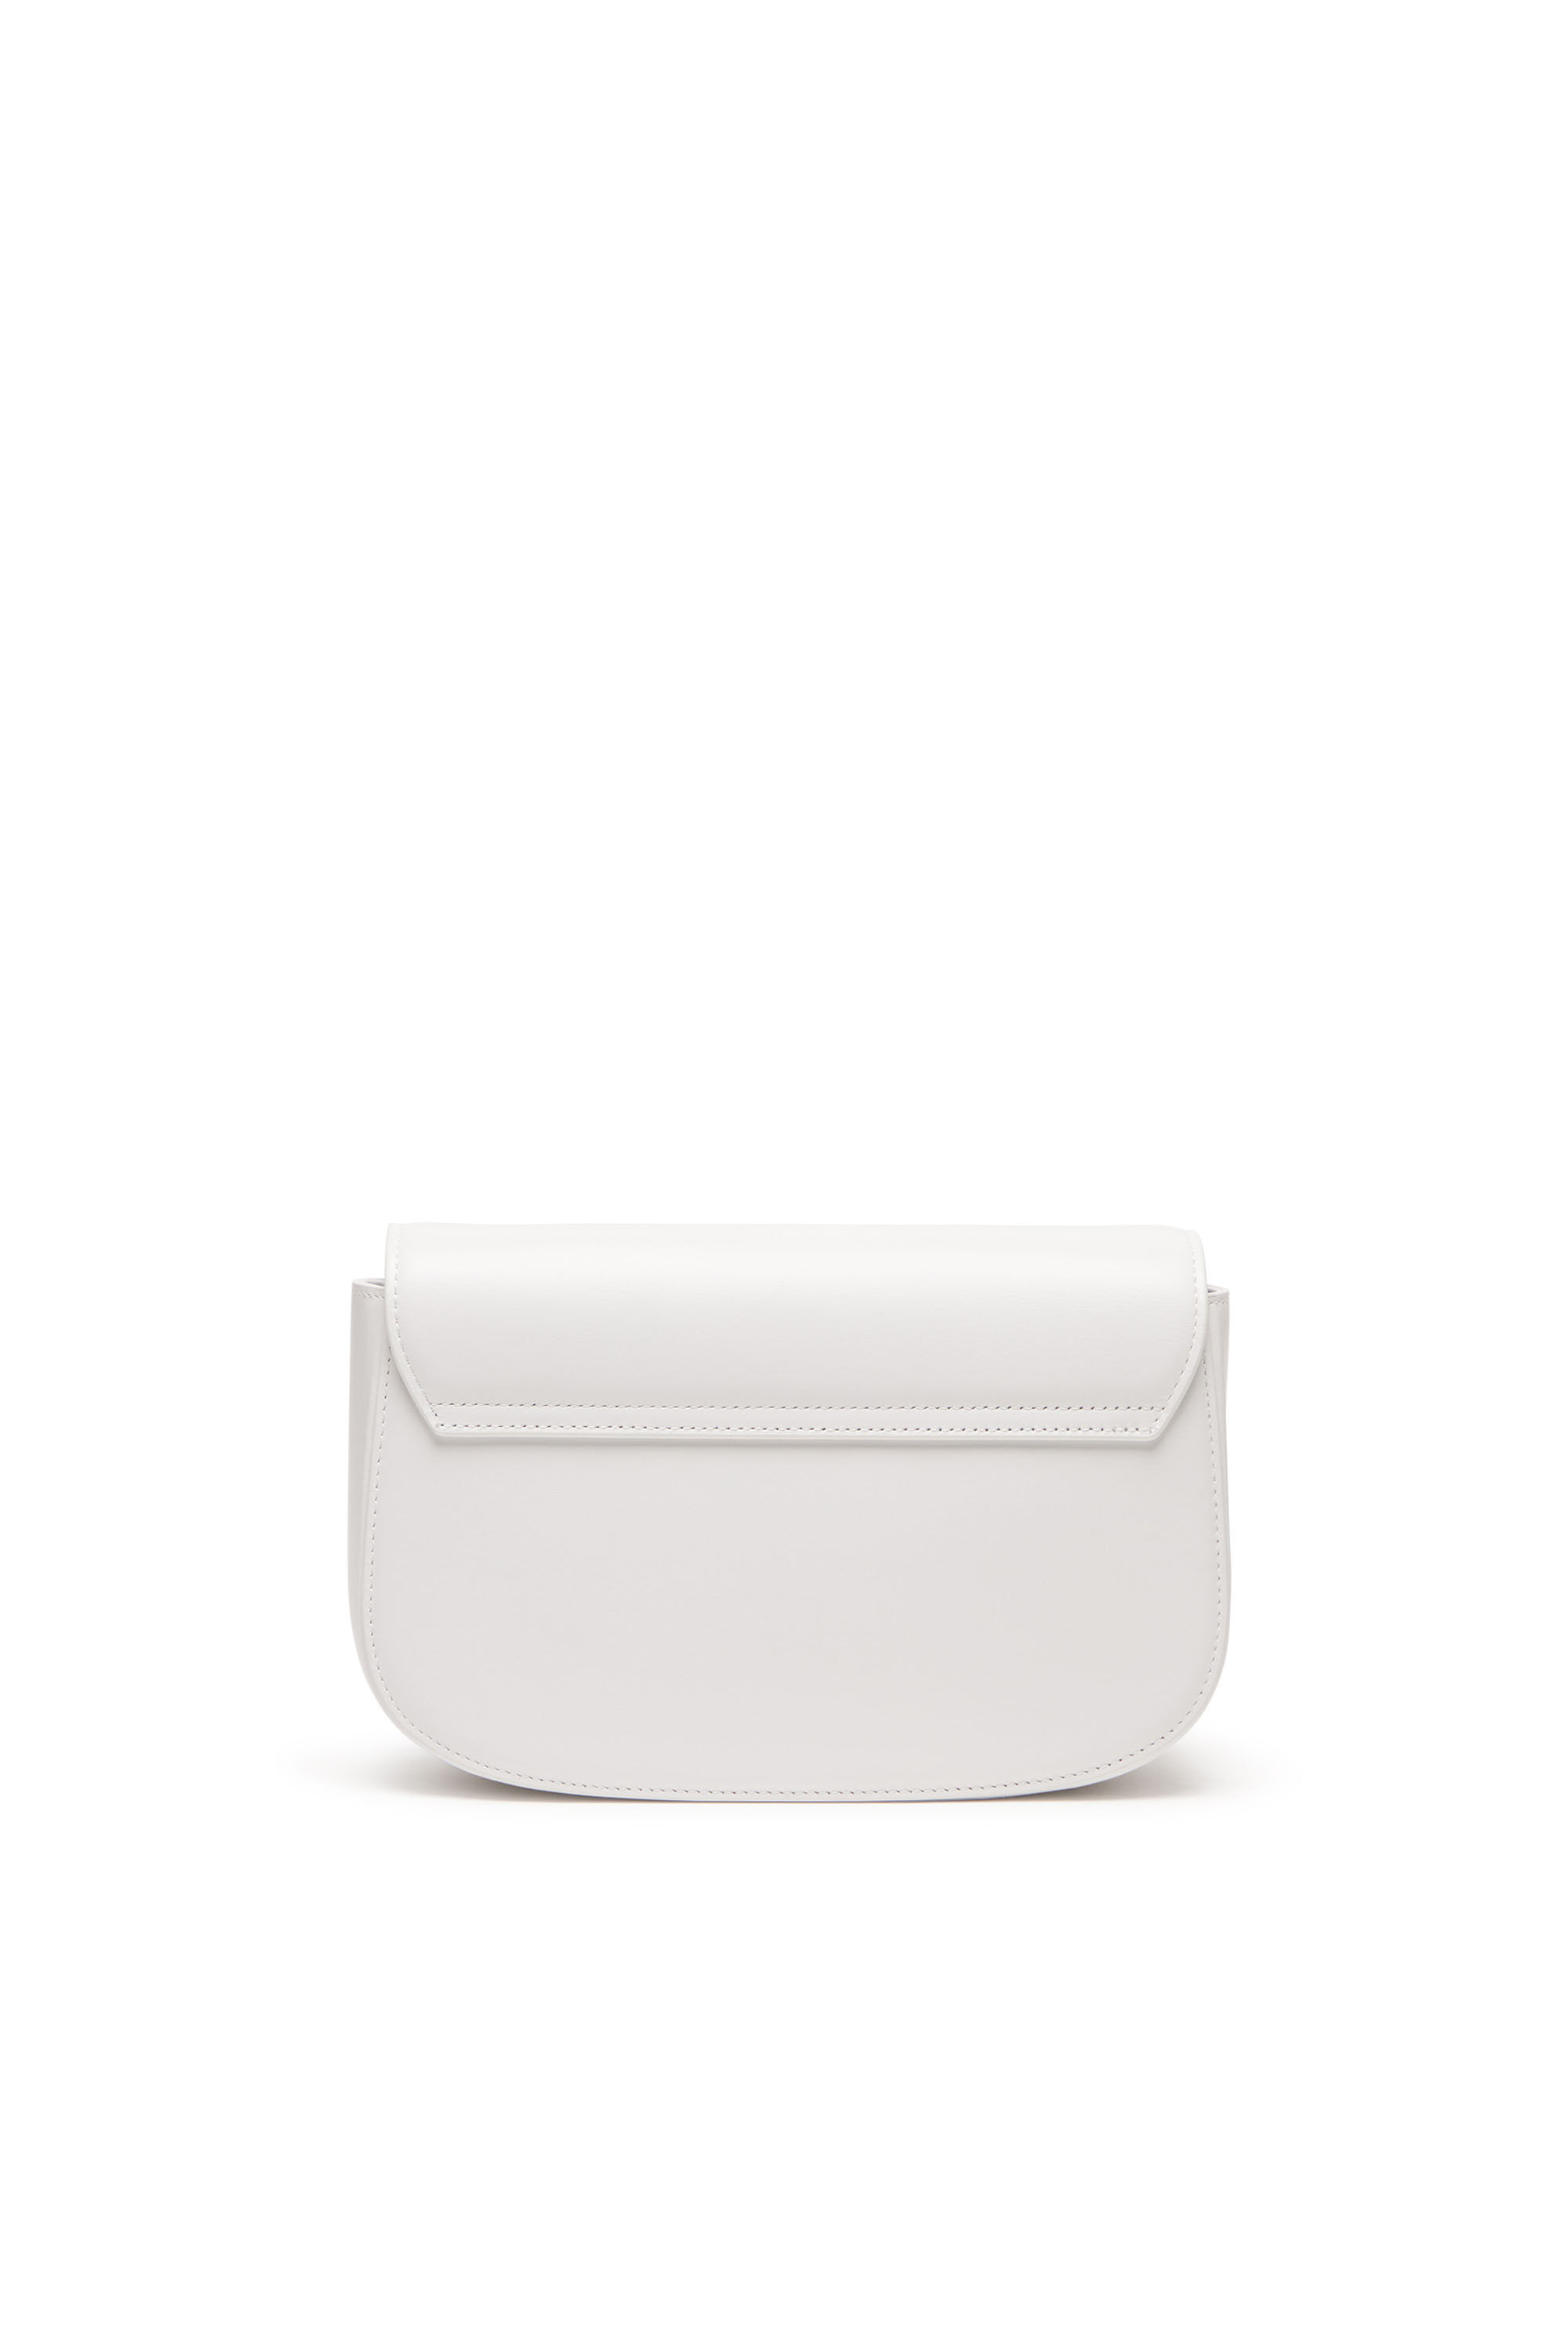 Diesel - 1DR M, Woman 1DR M-Iconic medium shoulder bag in leather in White - Image 3